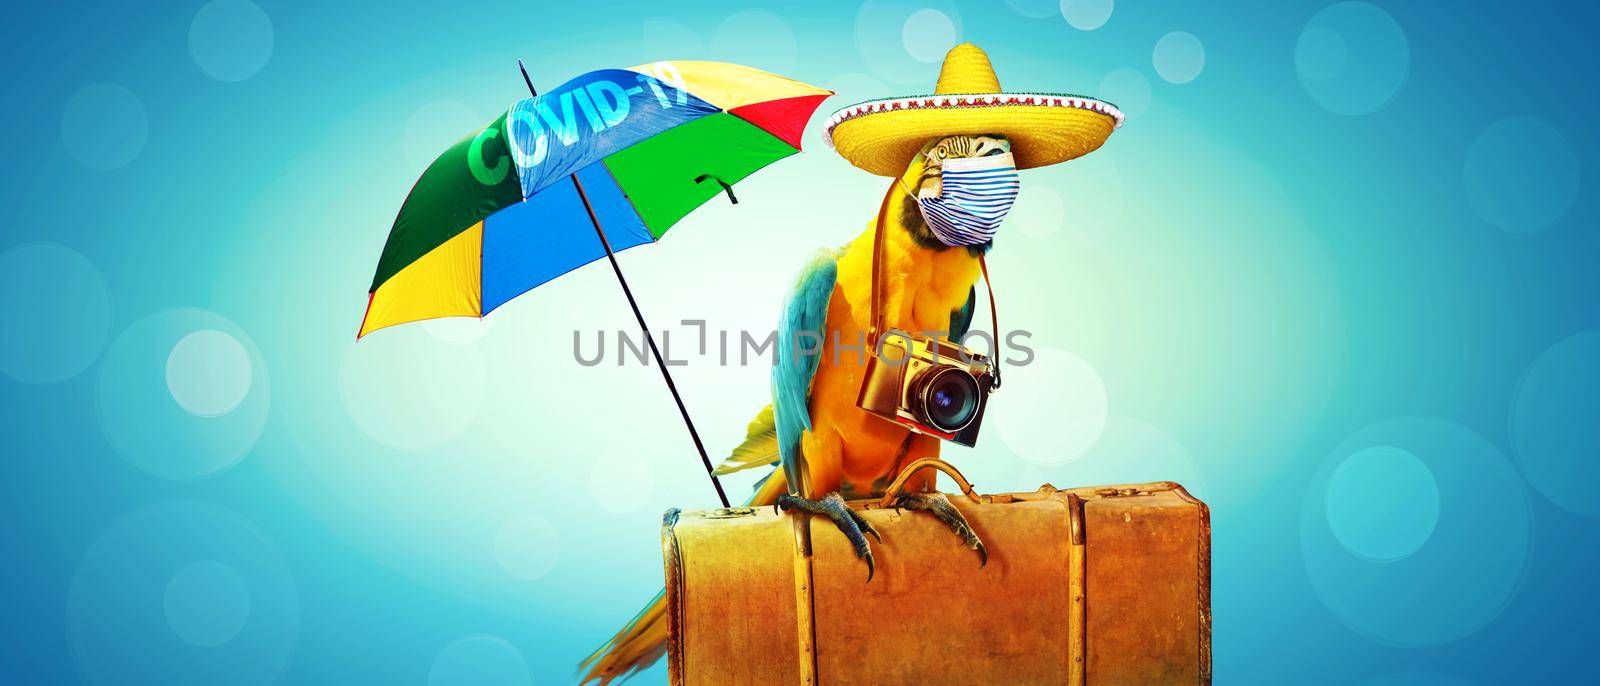 Corona virus outbreak. Travel at pandemic time concept